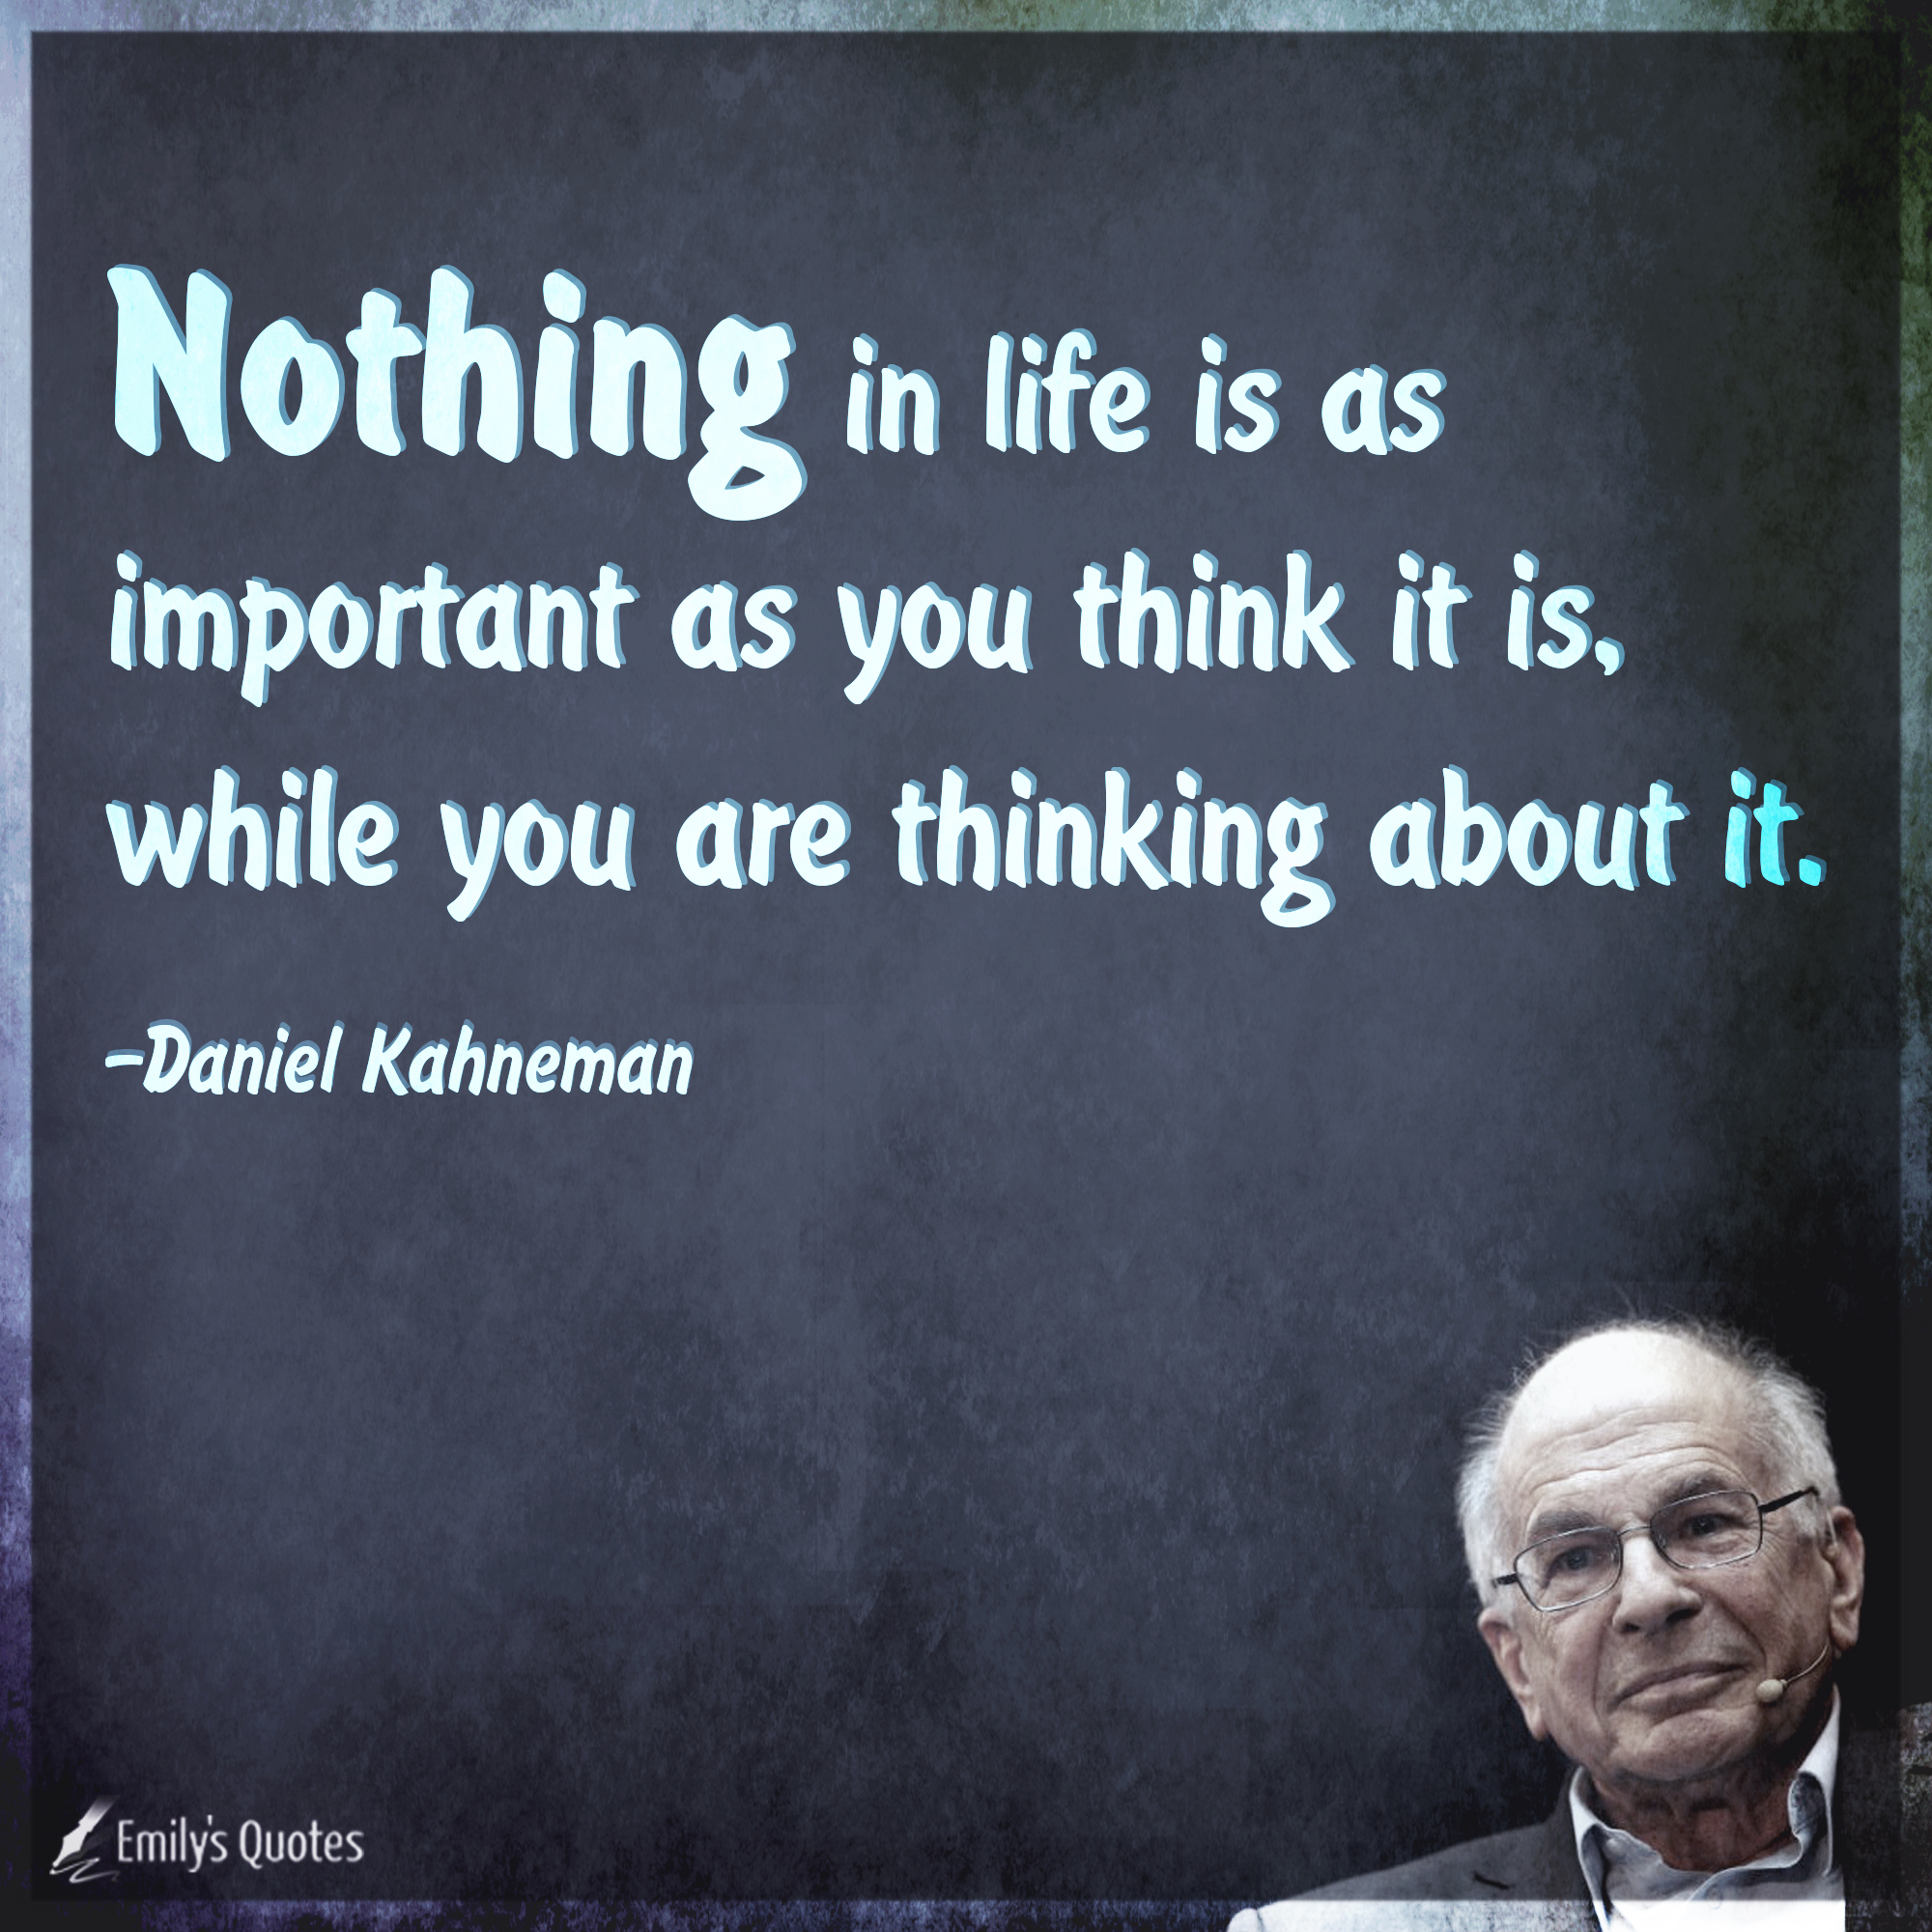 Nothing in life is as important as you think it is, while you are thinking about it